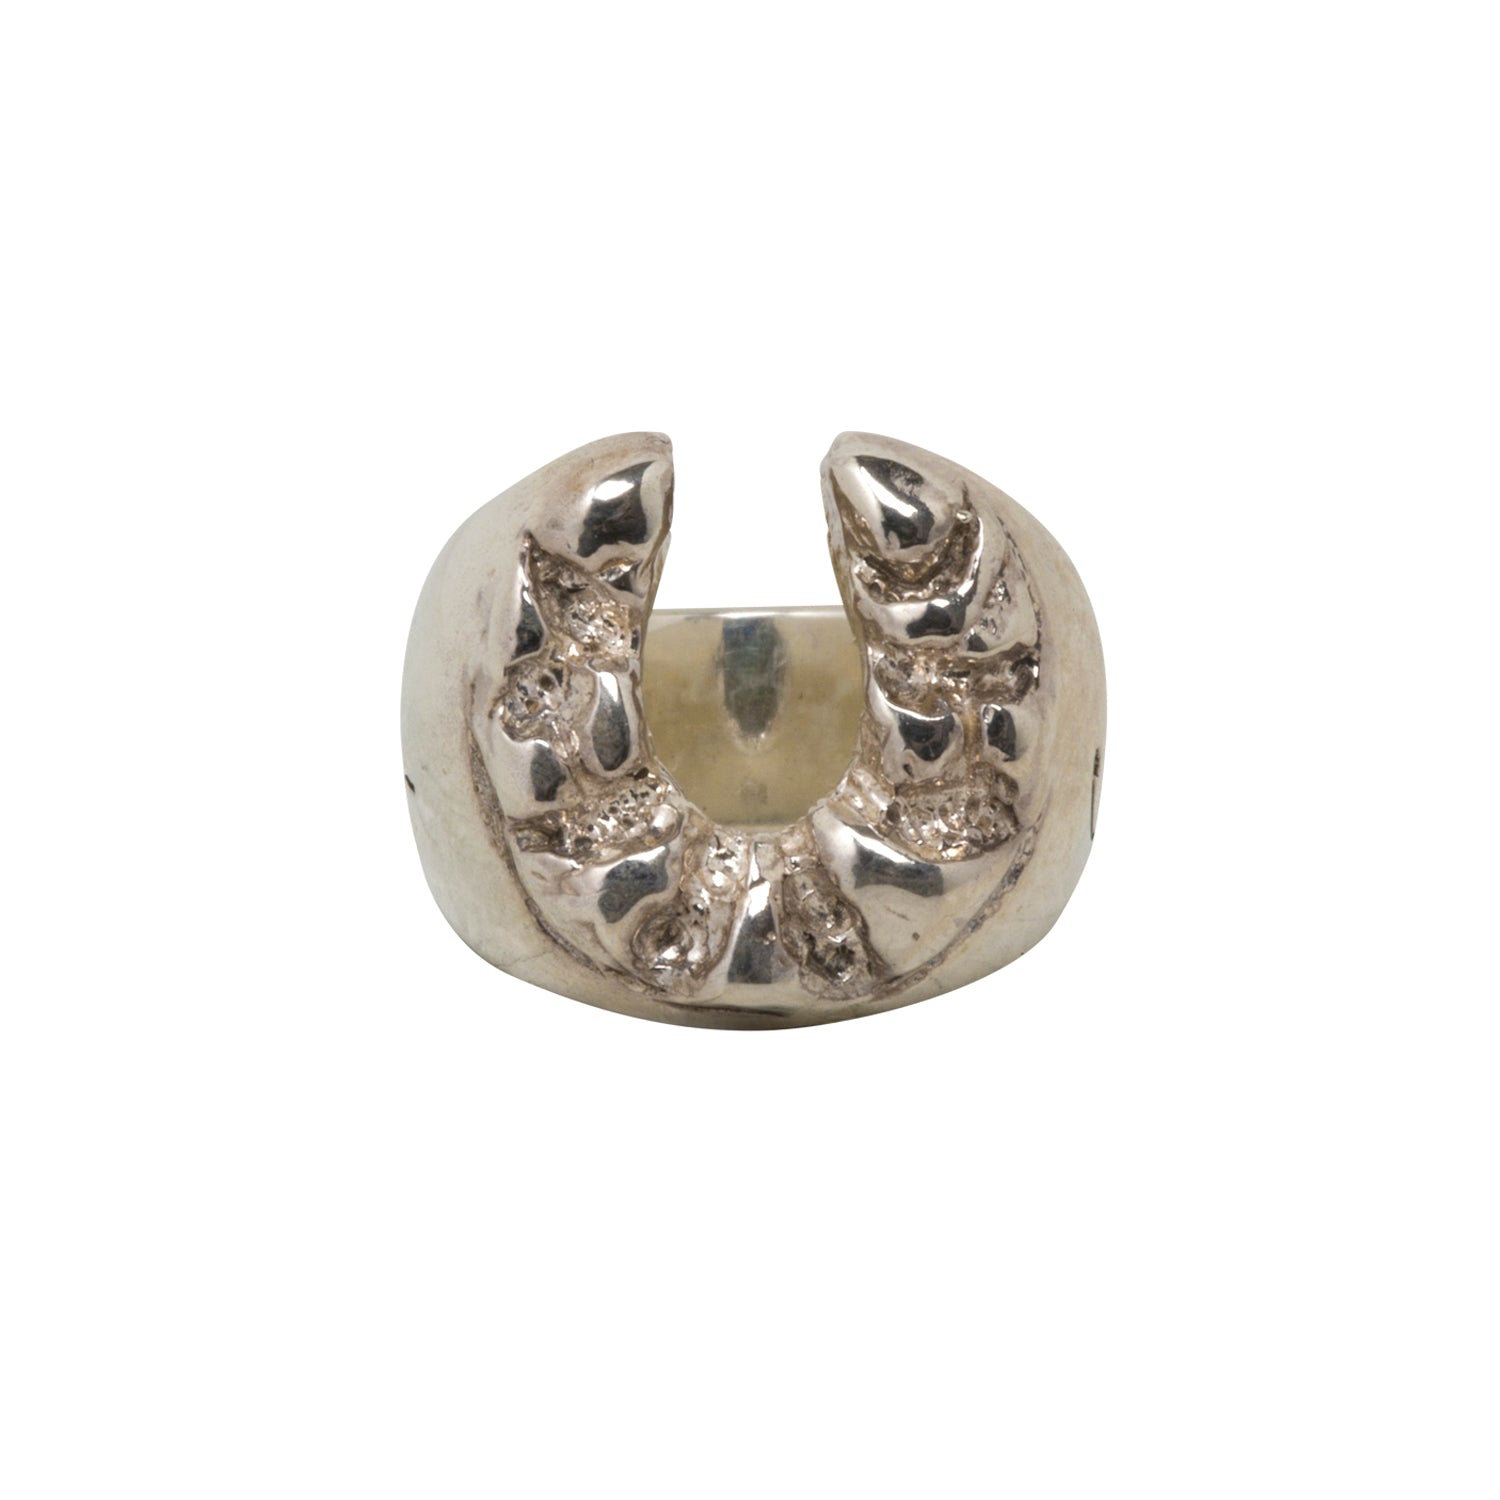 G&F Co. - HORSE SHOE RING _ SILVER 925